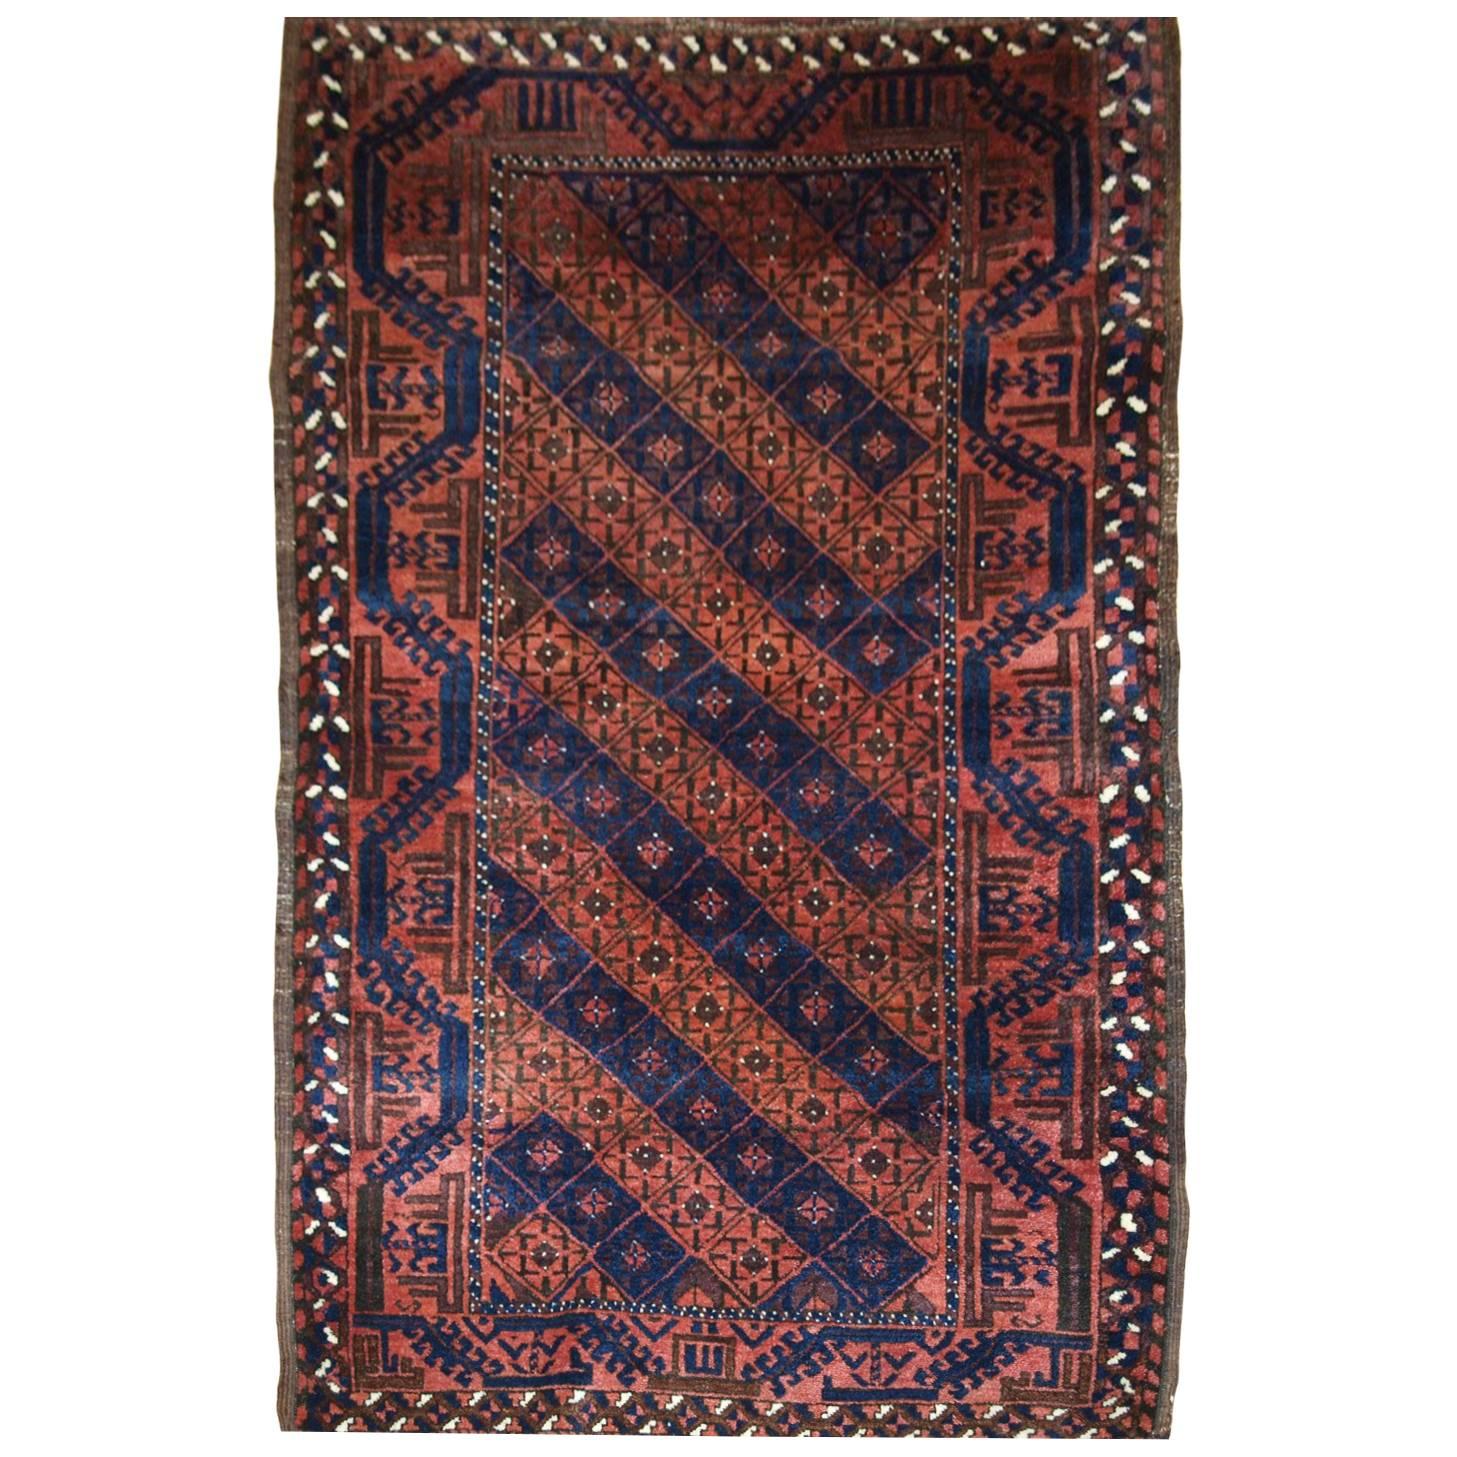 Antique Persian Baluch Rug from Eastern Persia, circa 1900